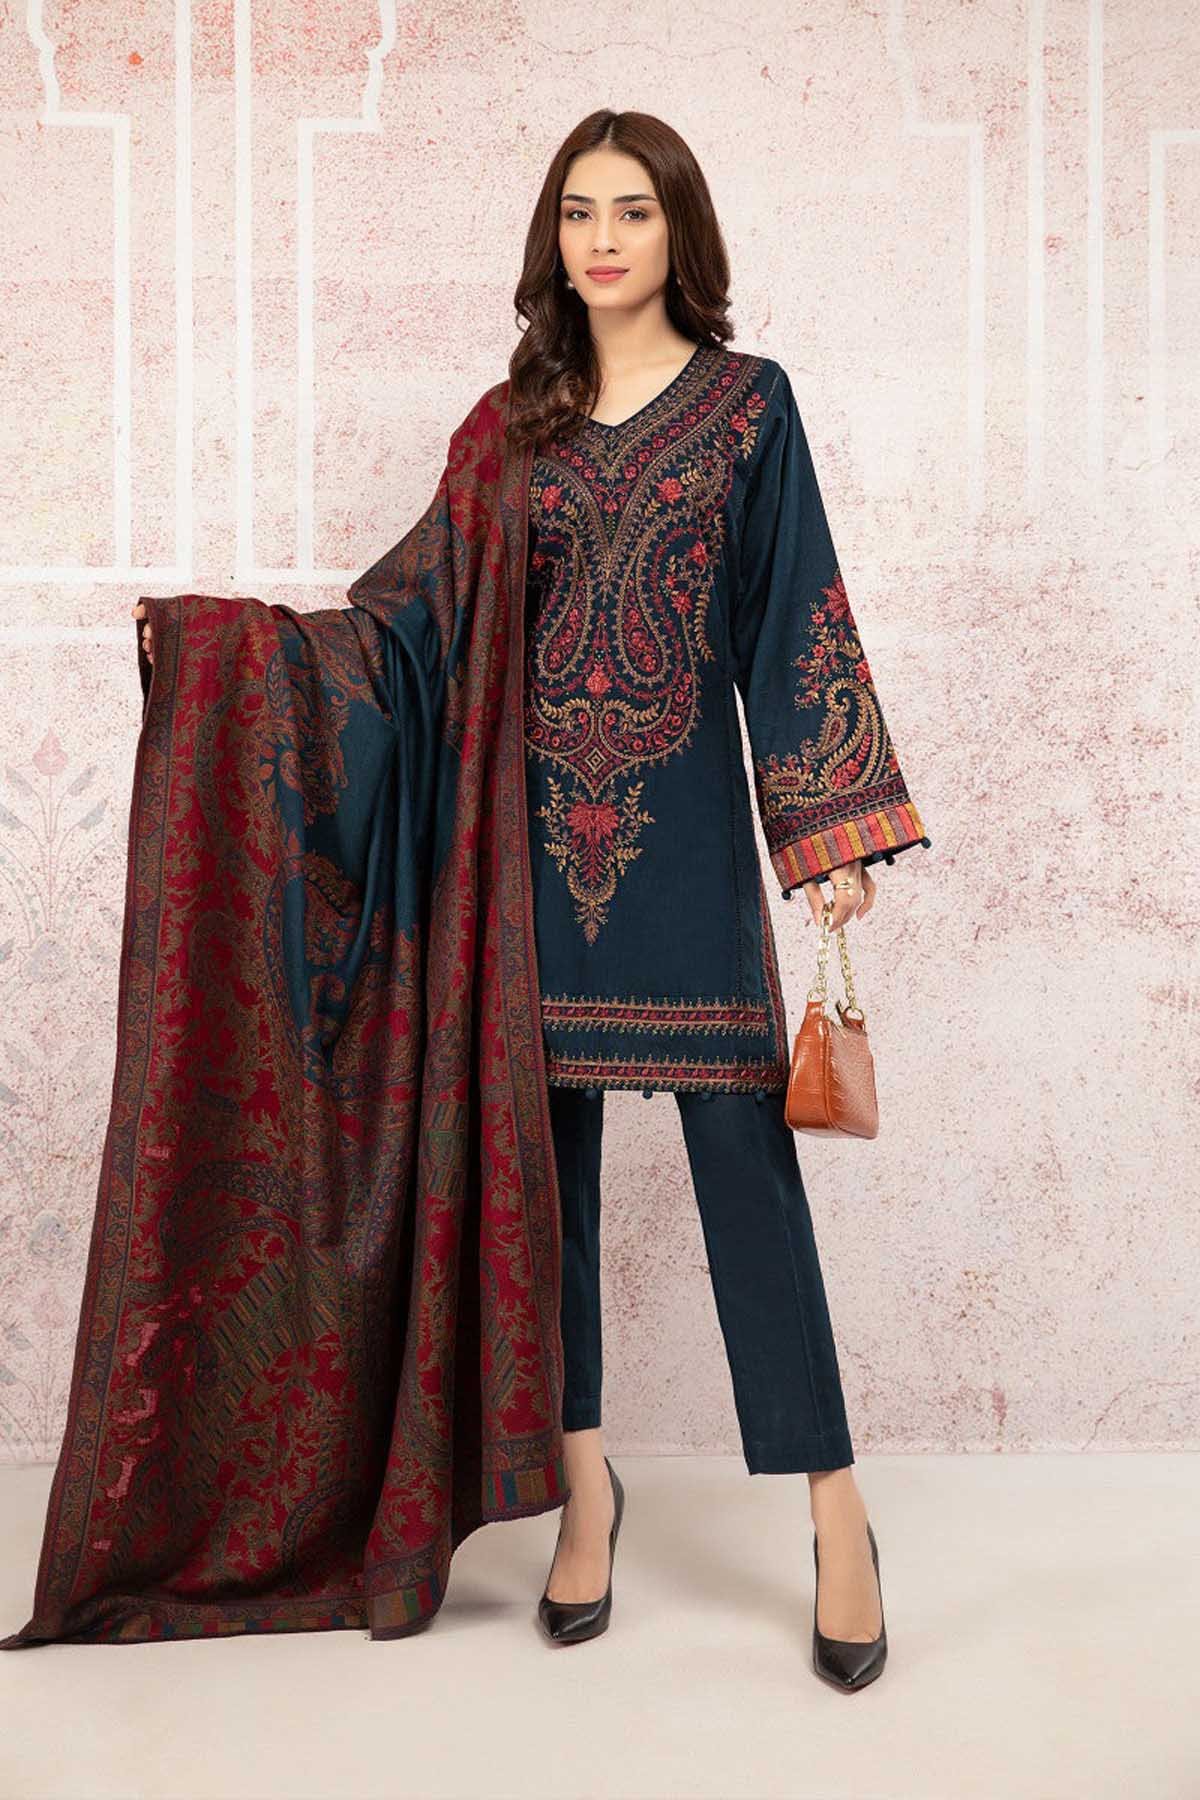 MariaB women new dress design empires collection pakistan top brand clothing brand fashion 3 piece suit